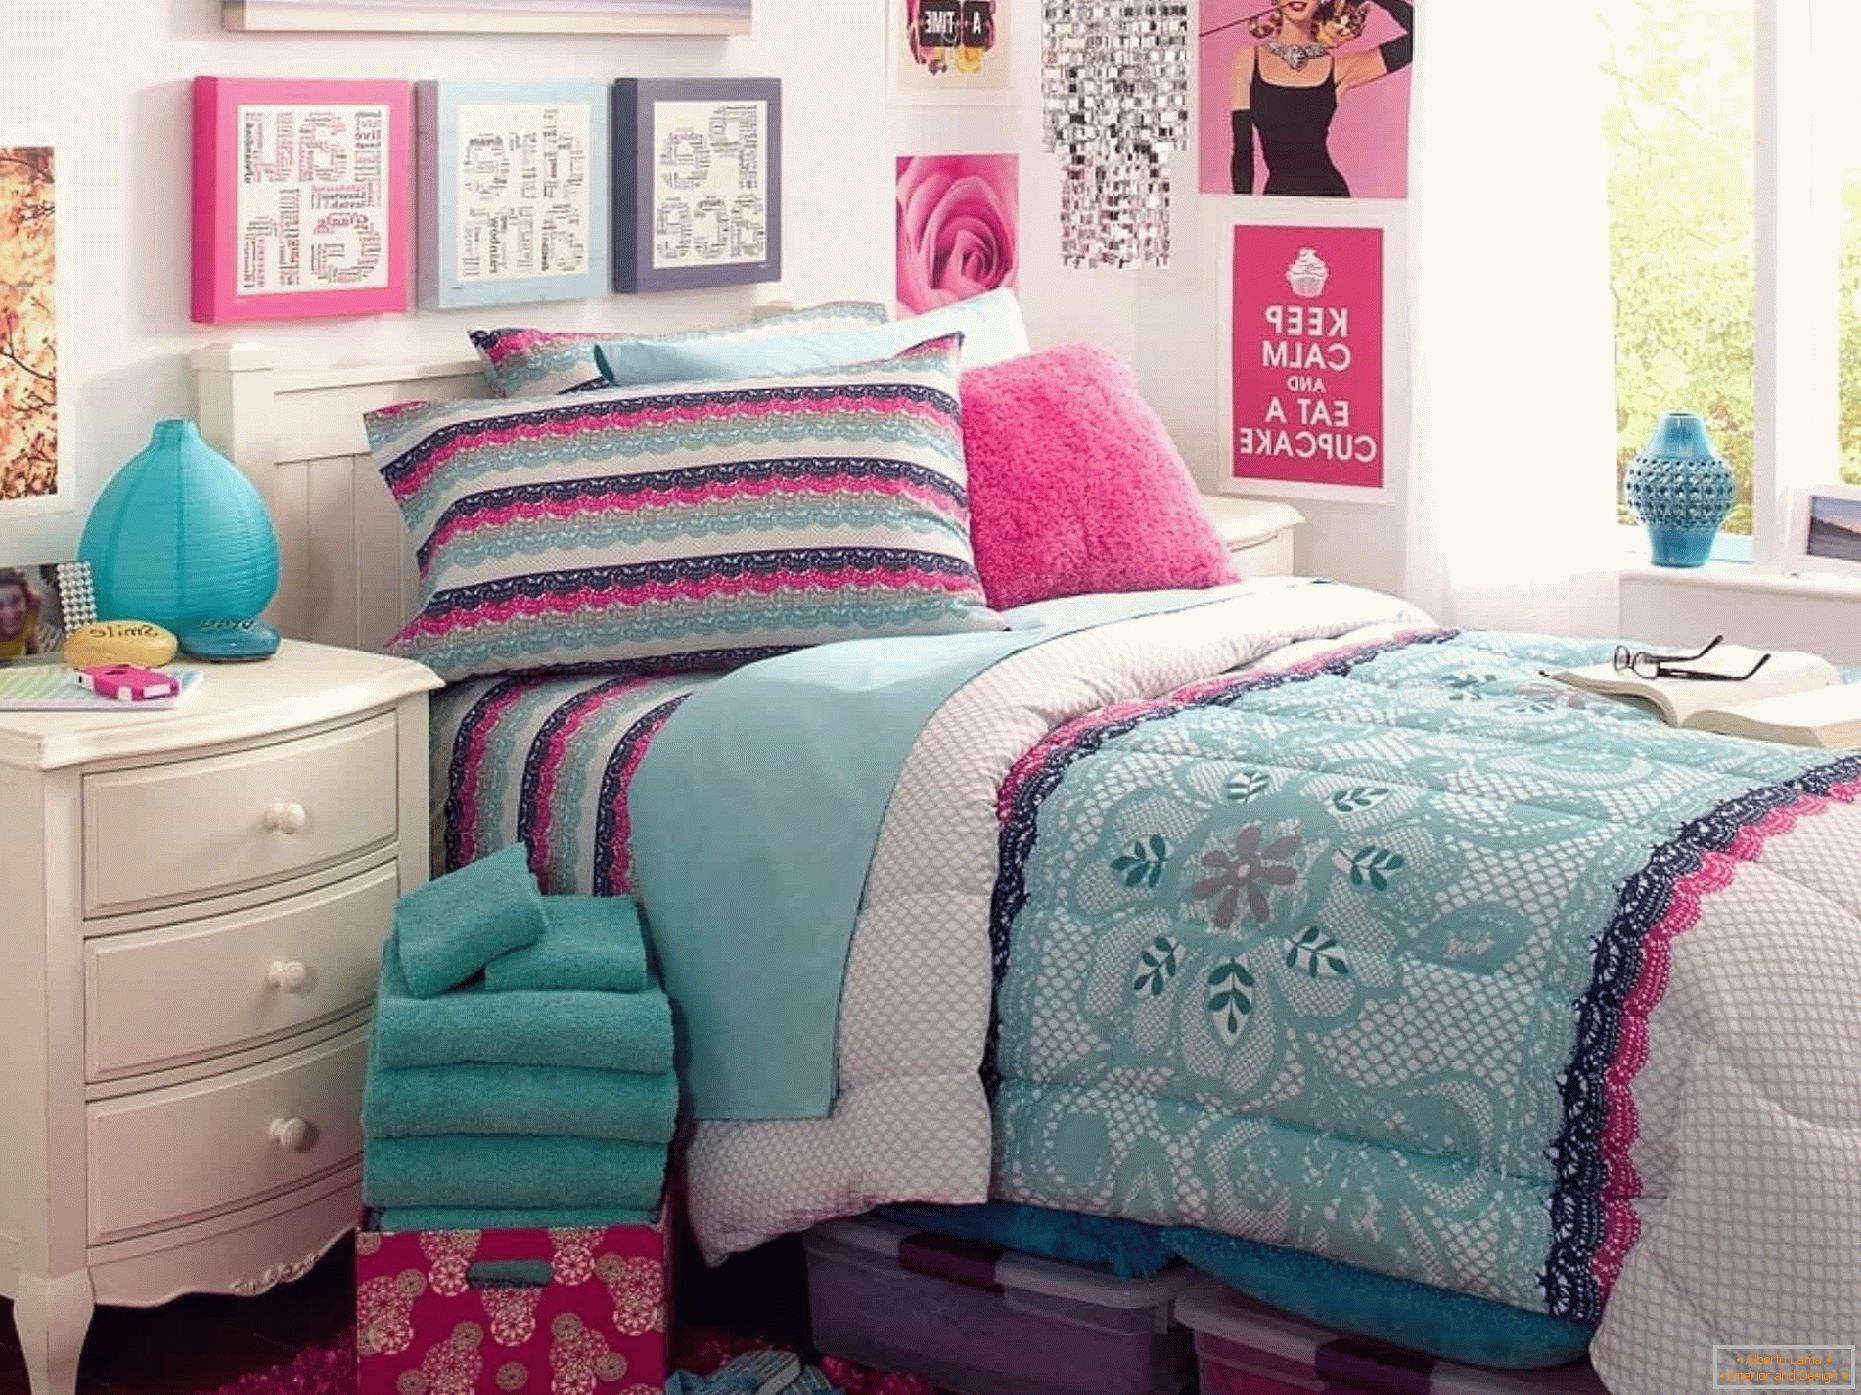 Design of a teenage room for a girl